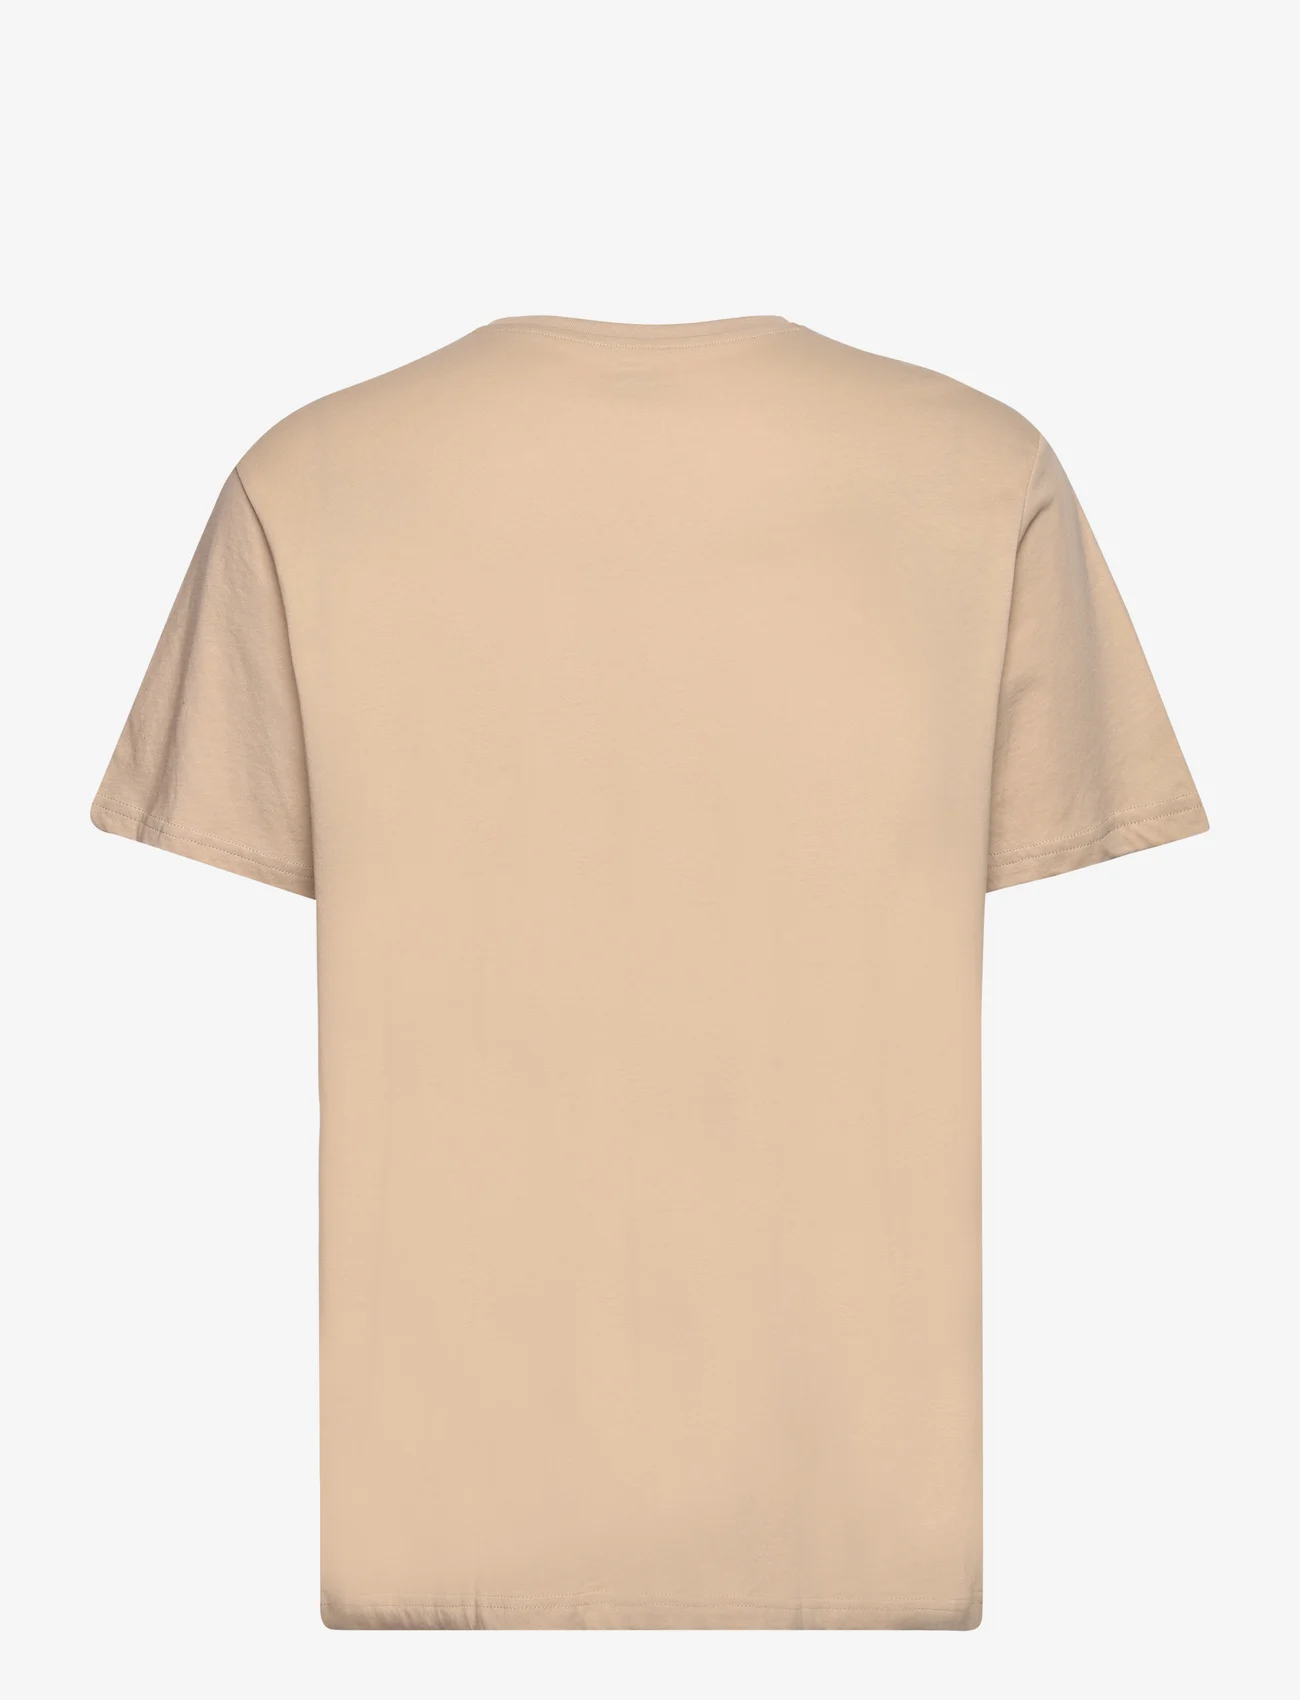 Lee Jeans - Pocket Tee - short-sleeved t-shirts - oxford tan - 1